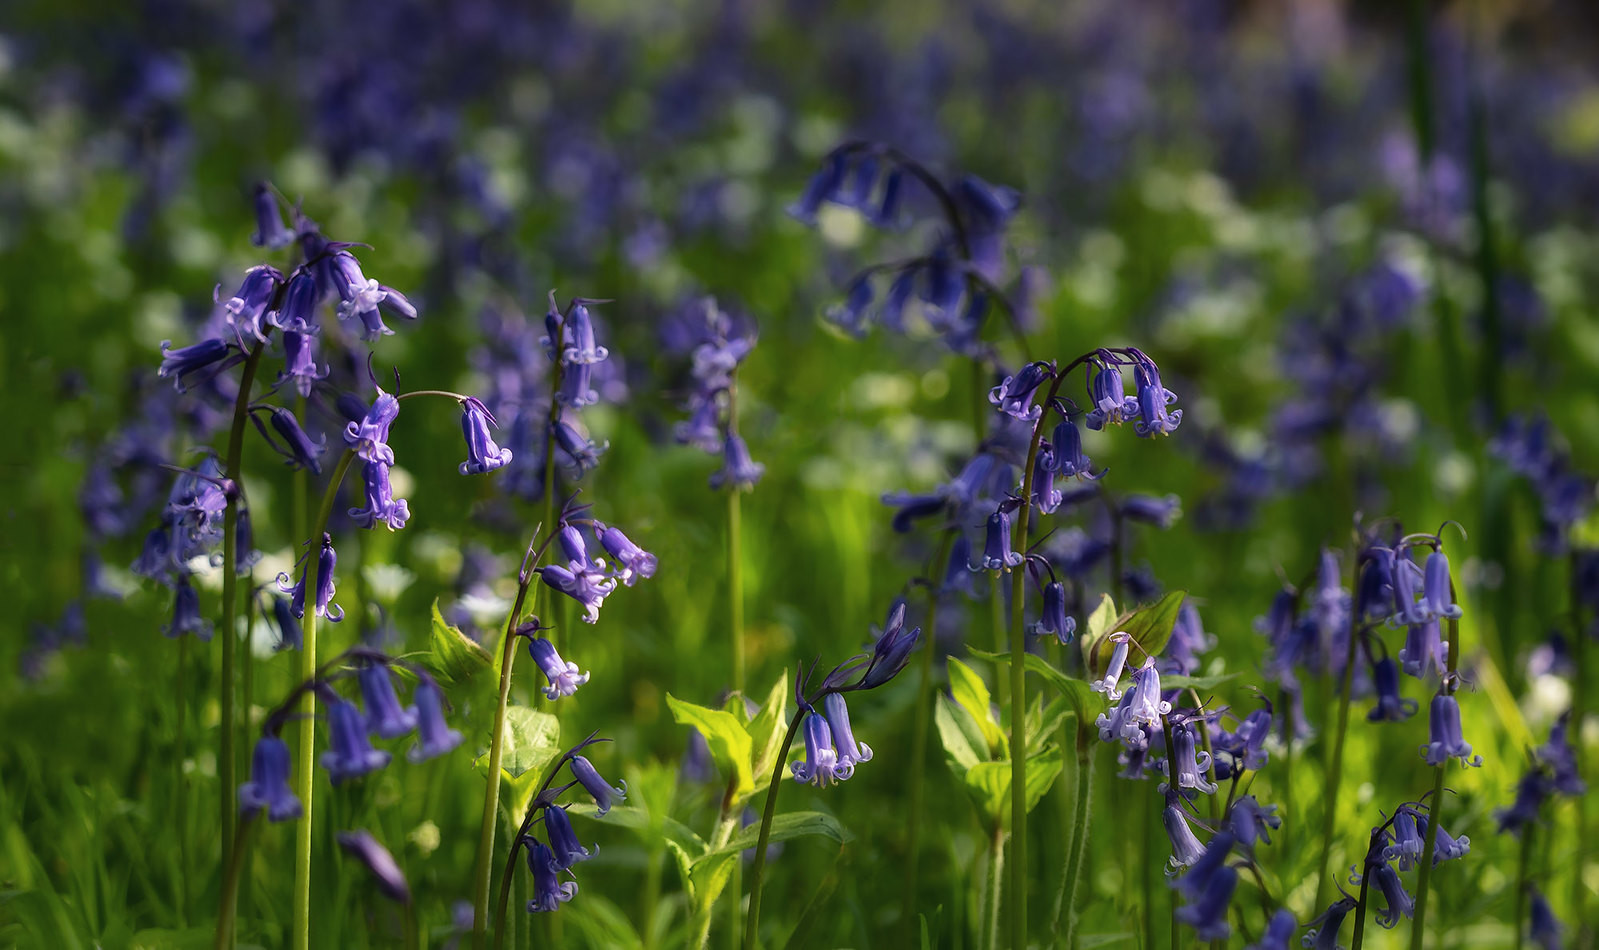 Bluebell closeup this afternoon